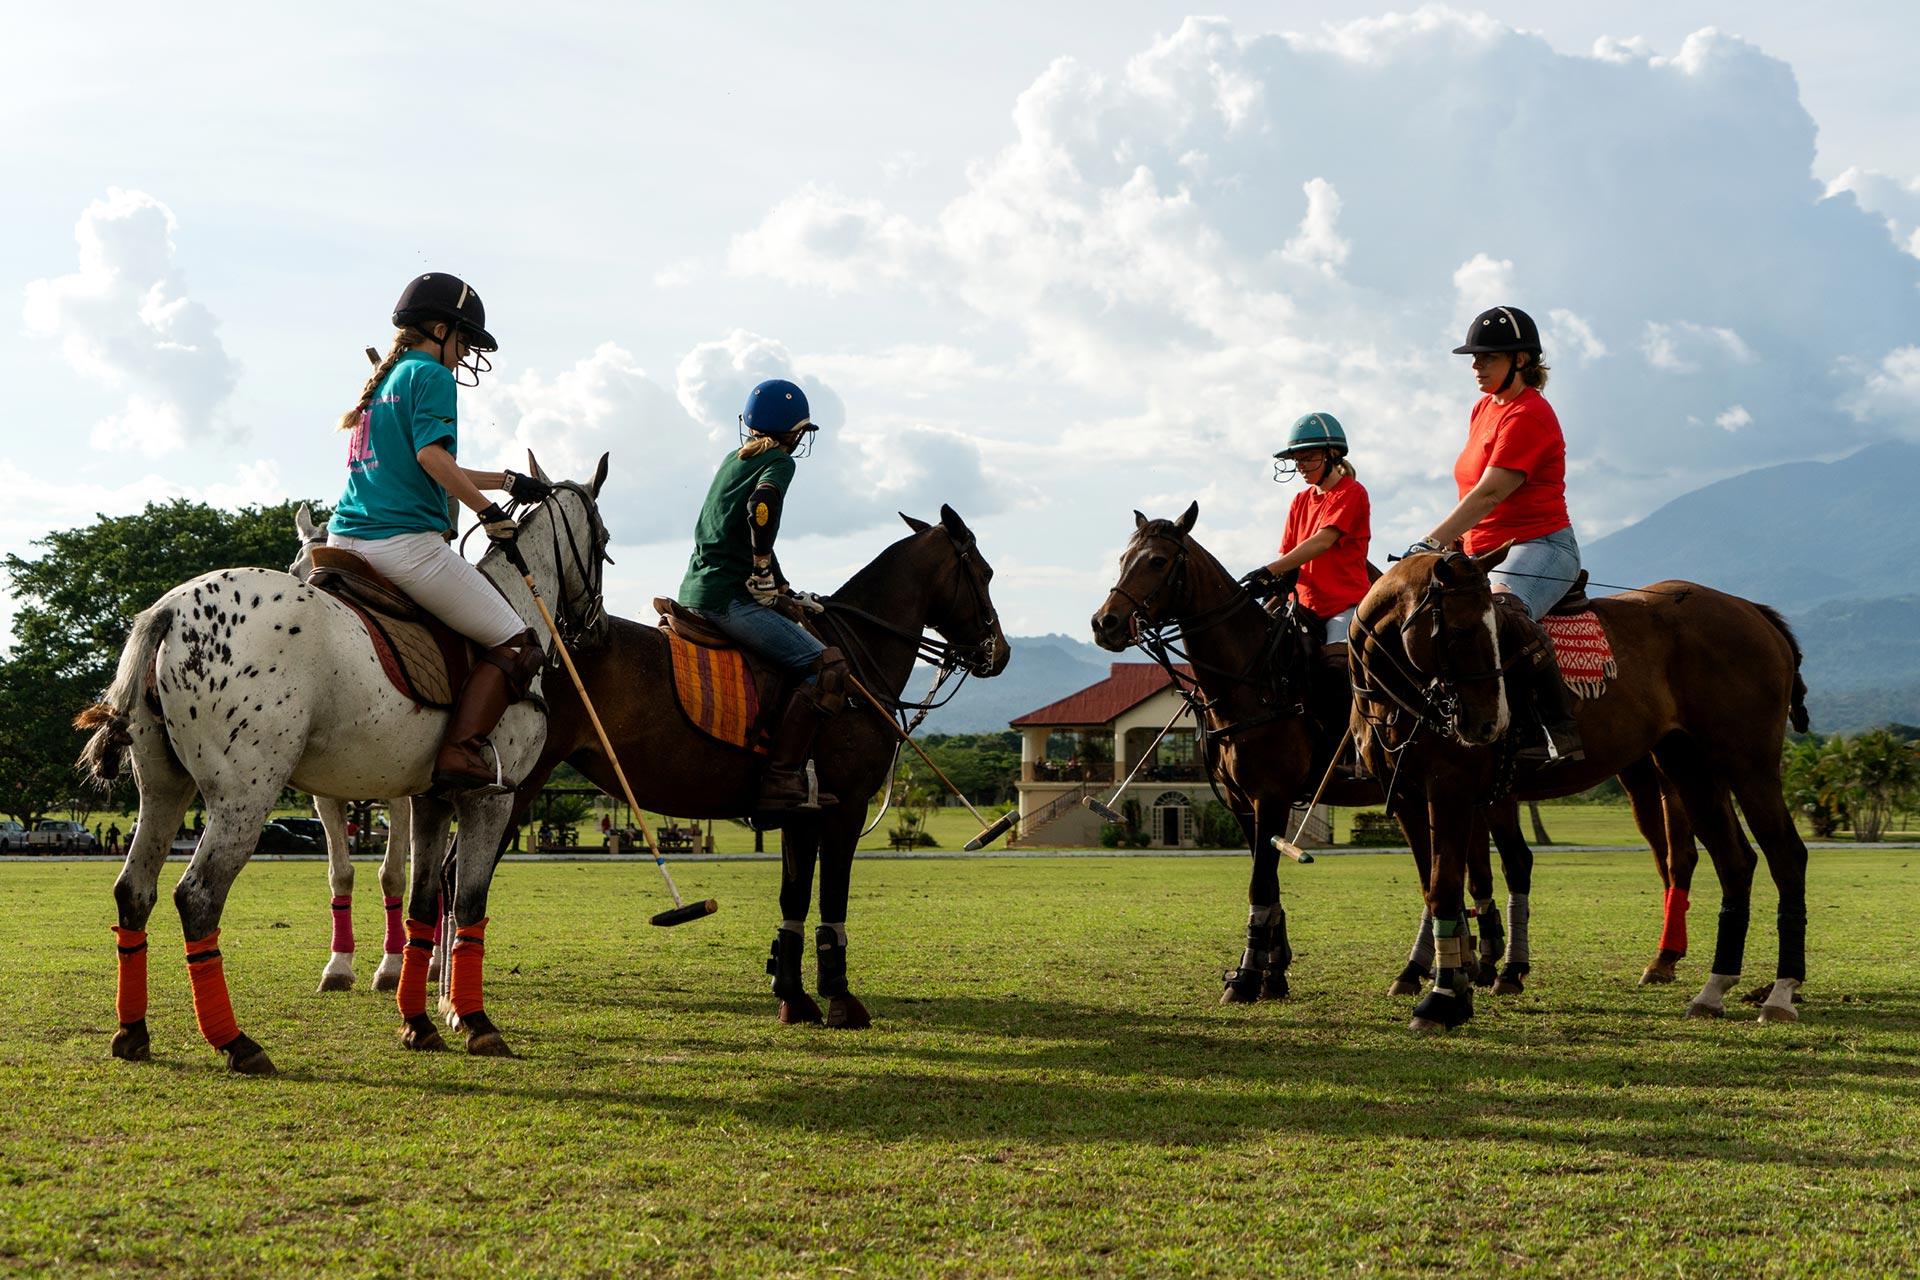 The Nduruma Polo and Country Club is set in the middle of an open field with a spectacular backdrop of Mount Meru. Polo is played three times per week and a game can be enjoyed from the comfort of the clubhouse.